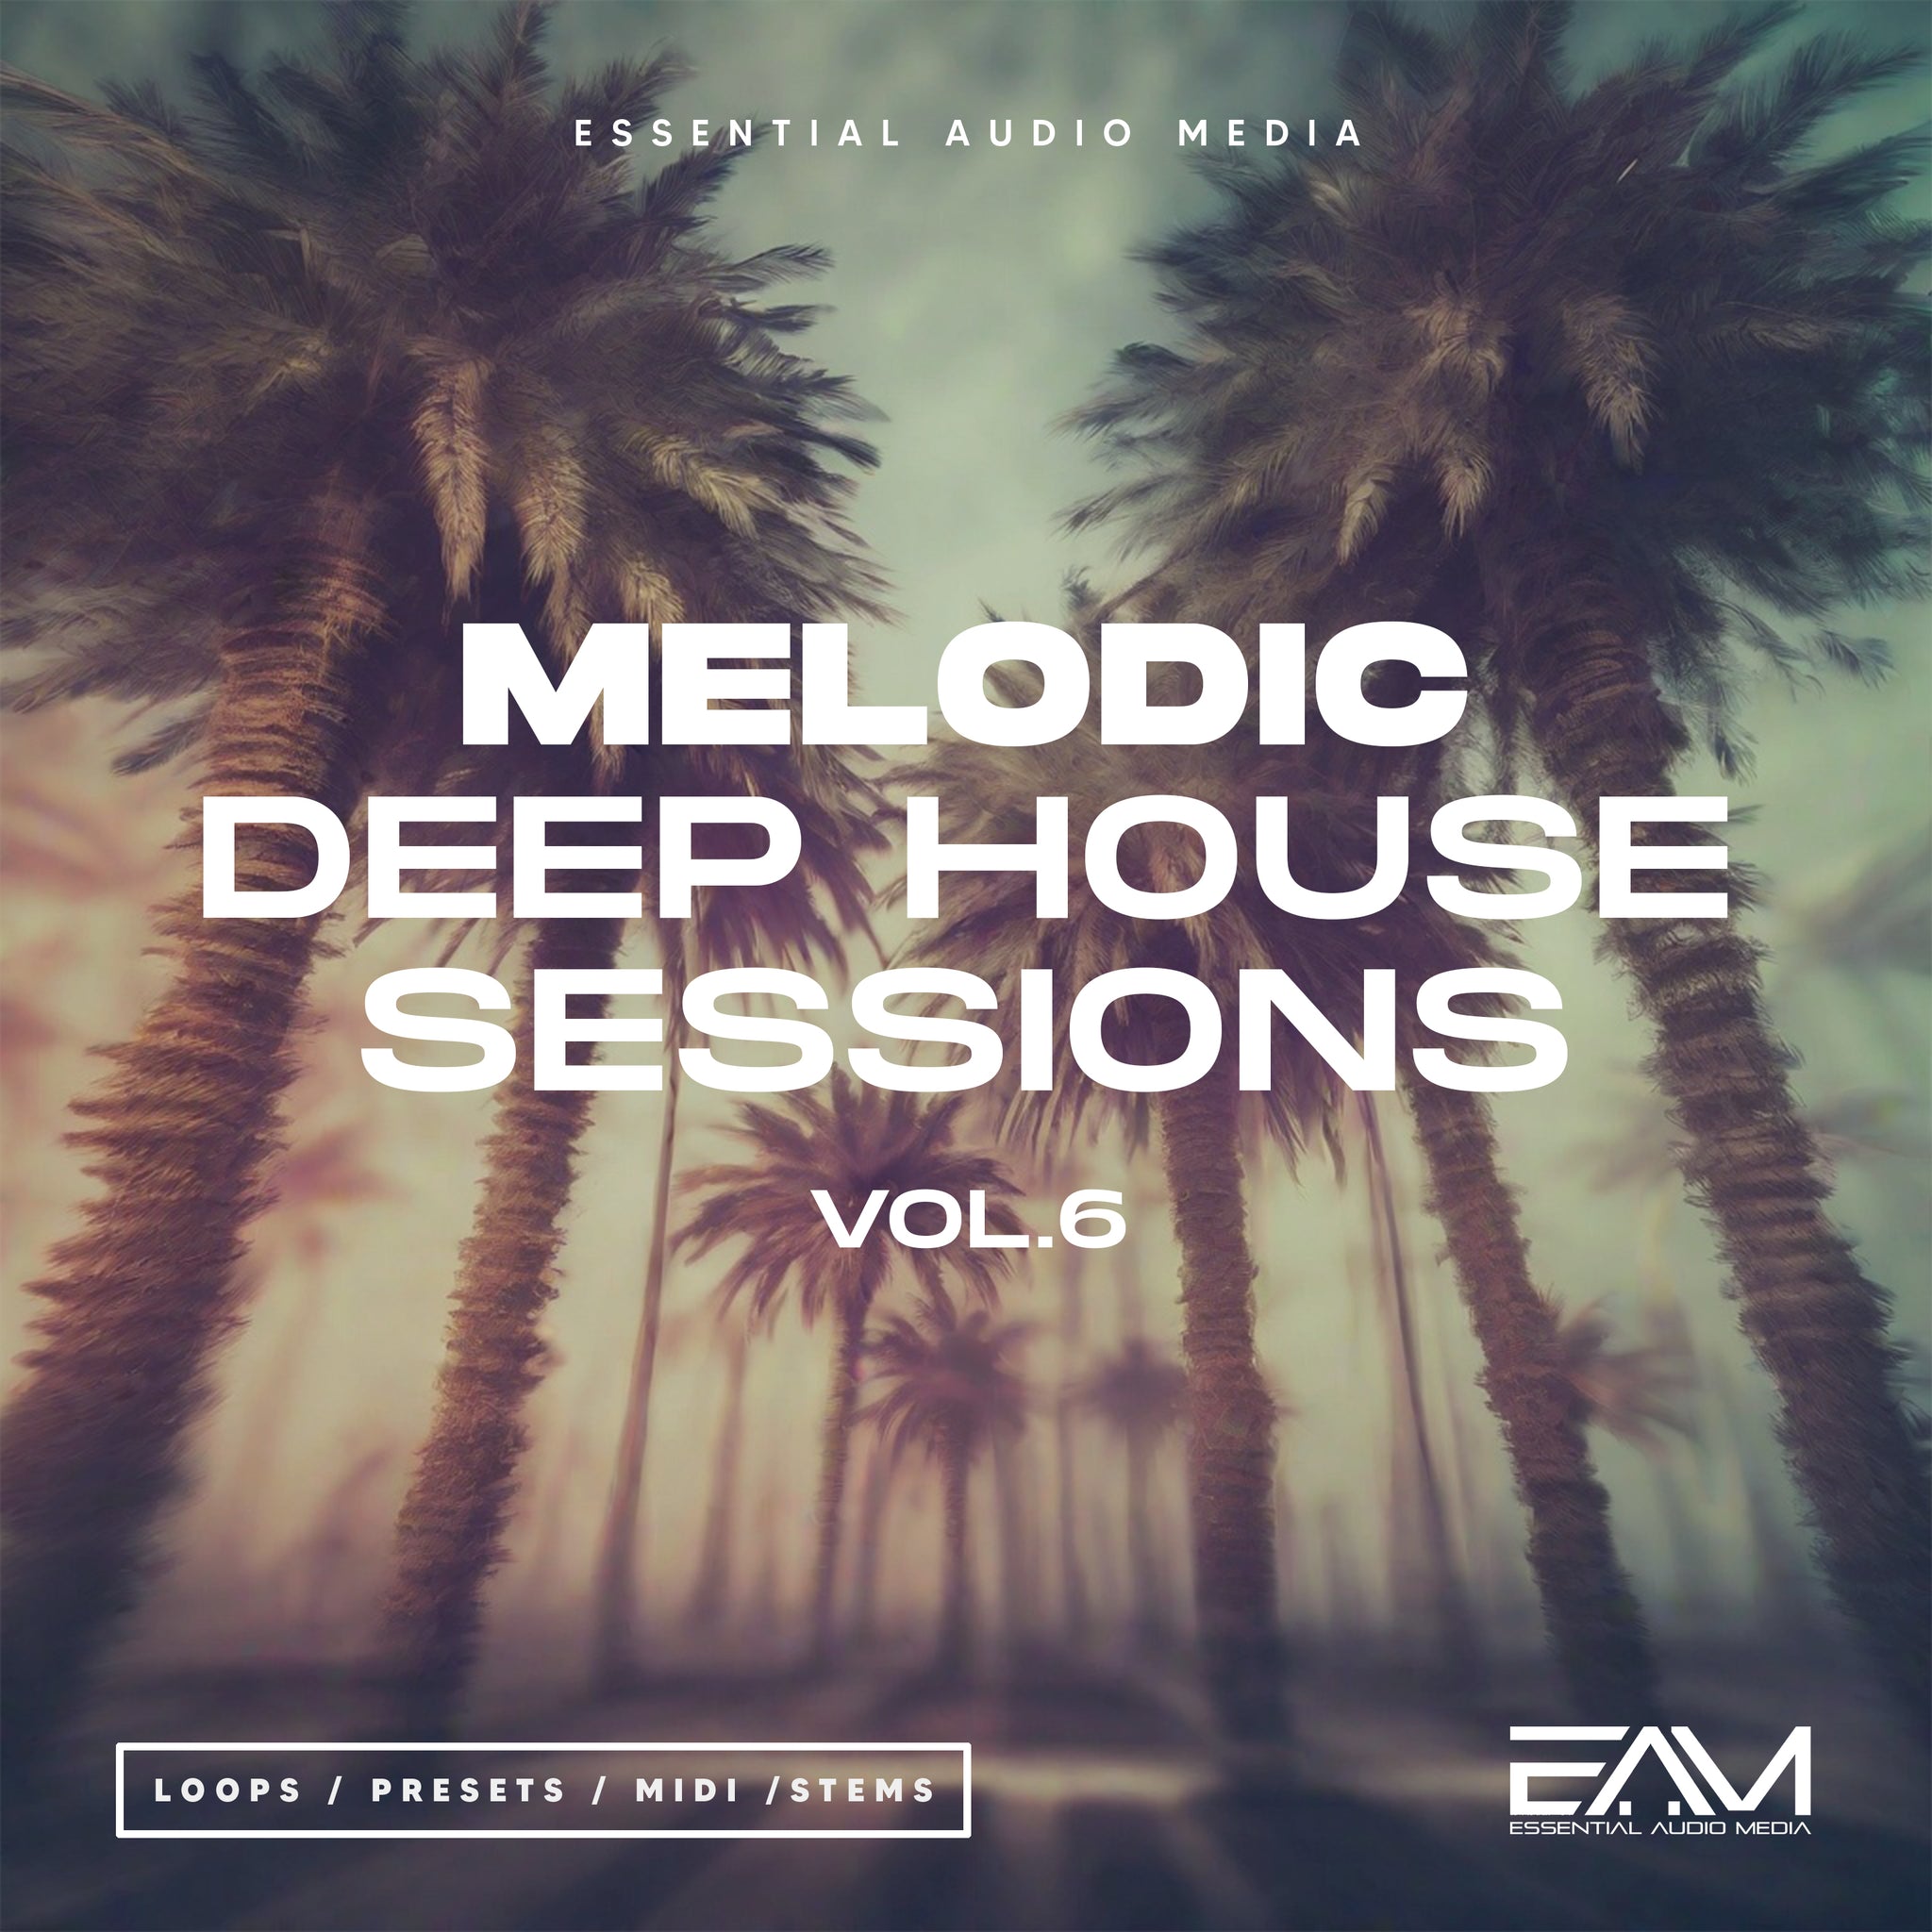 Melodic Deep House Sessions Vol.6